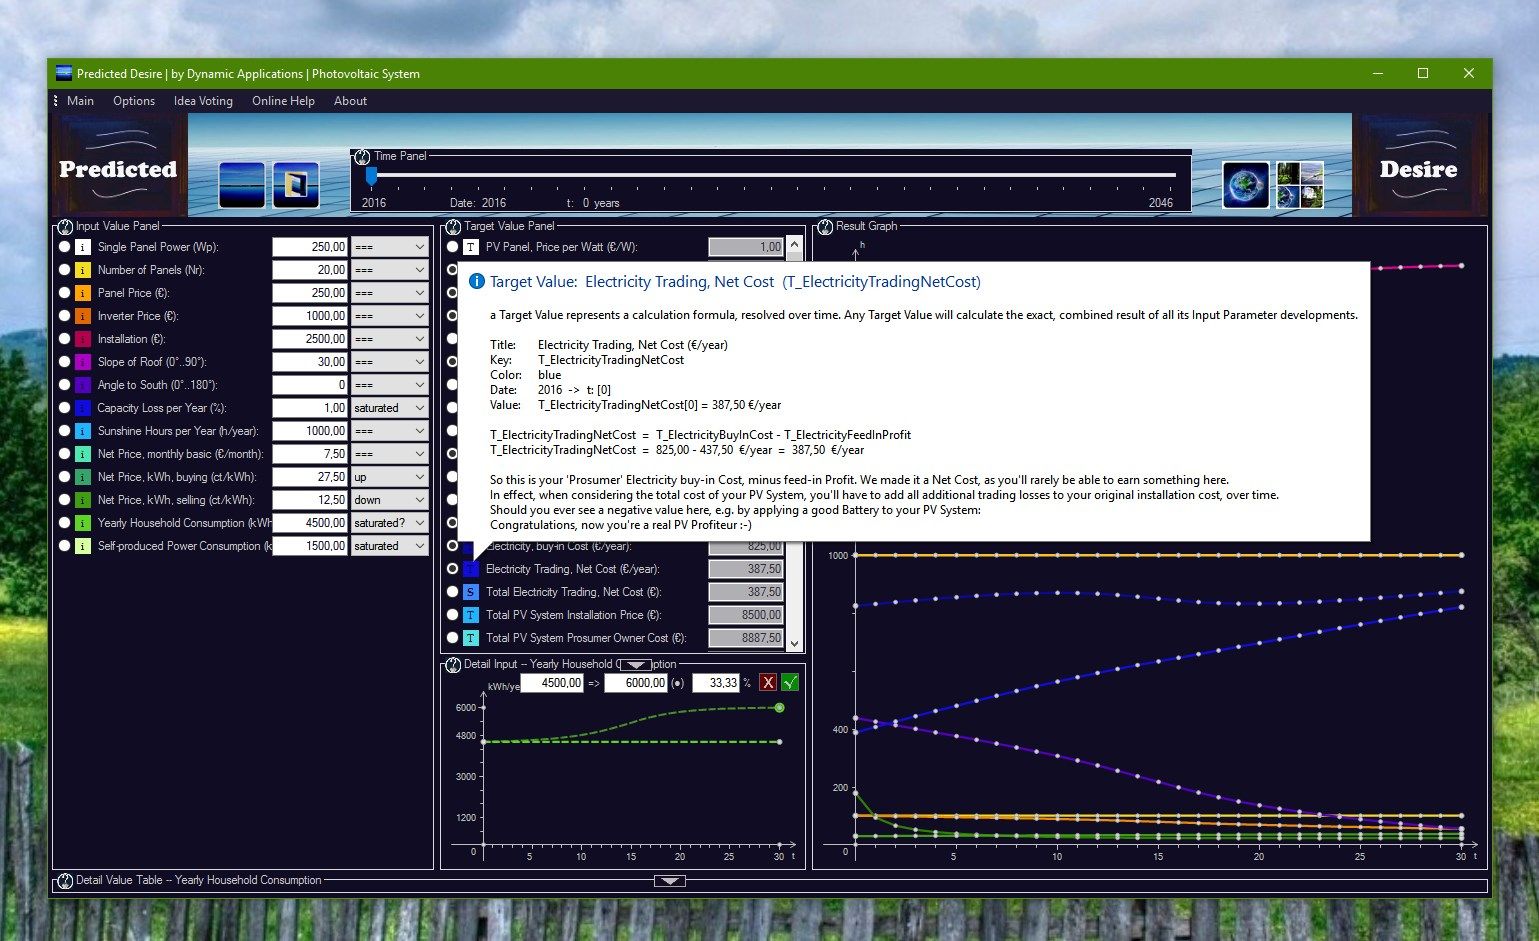 includes a variety of realistic Photovoltaic System simulations